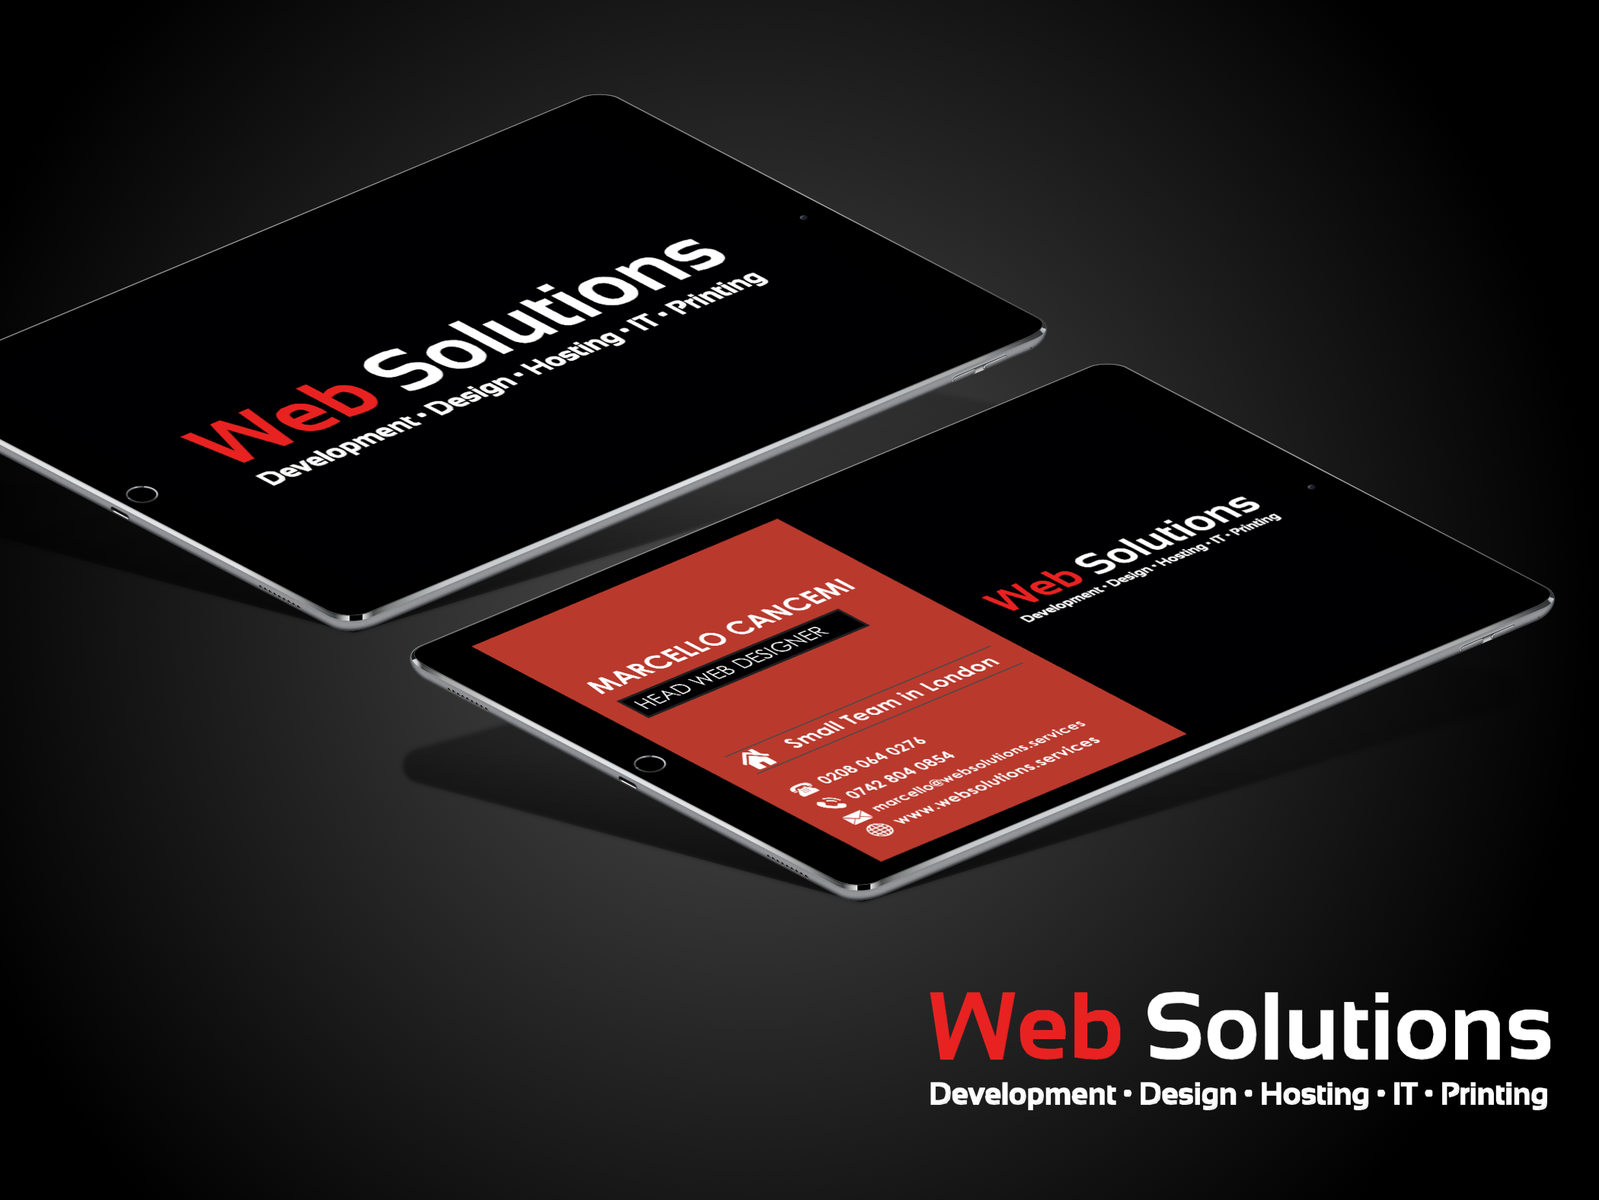 Business Card Design Web Solutions Ltd By Marcello On Dribbble